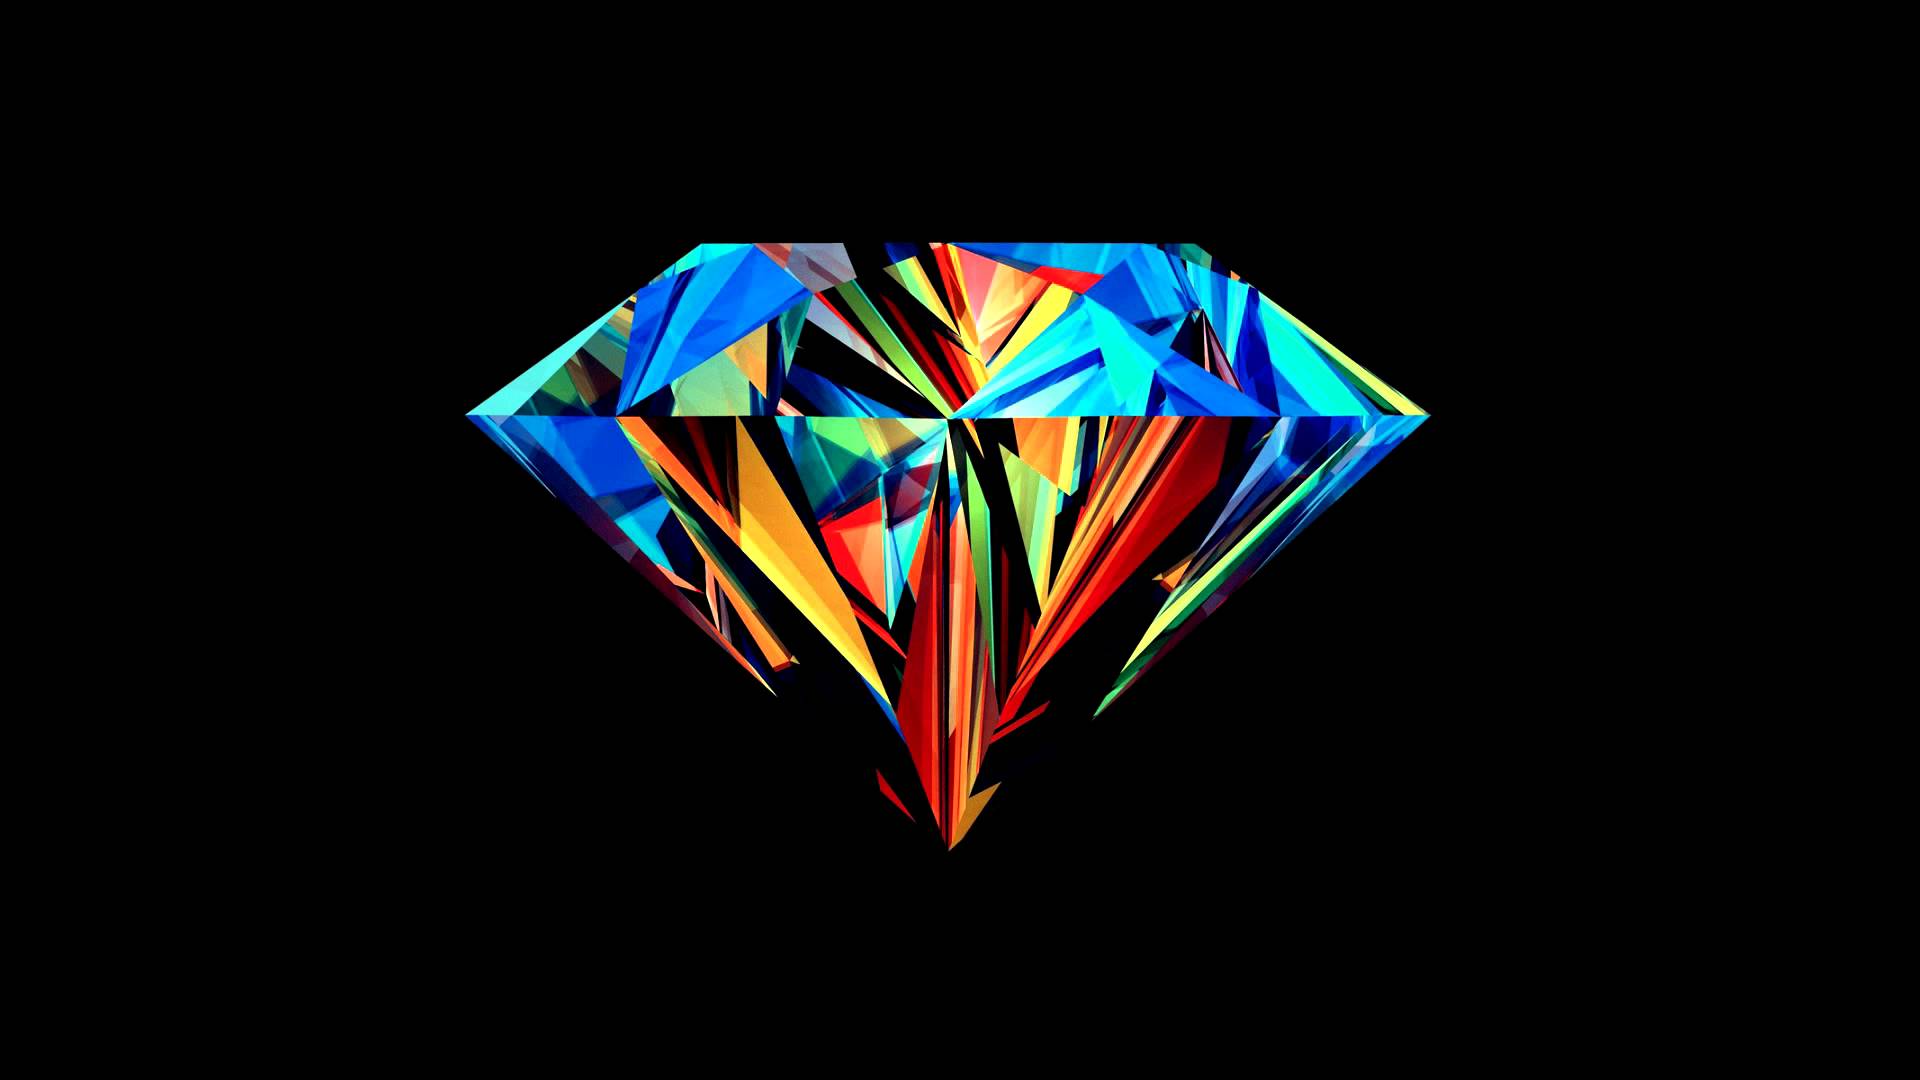 Swag Diamond Logo - Best 51+ Swagger Backgrounds on HipWallpaper | Tomboy Swagger ...